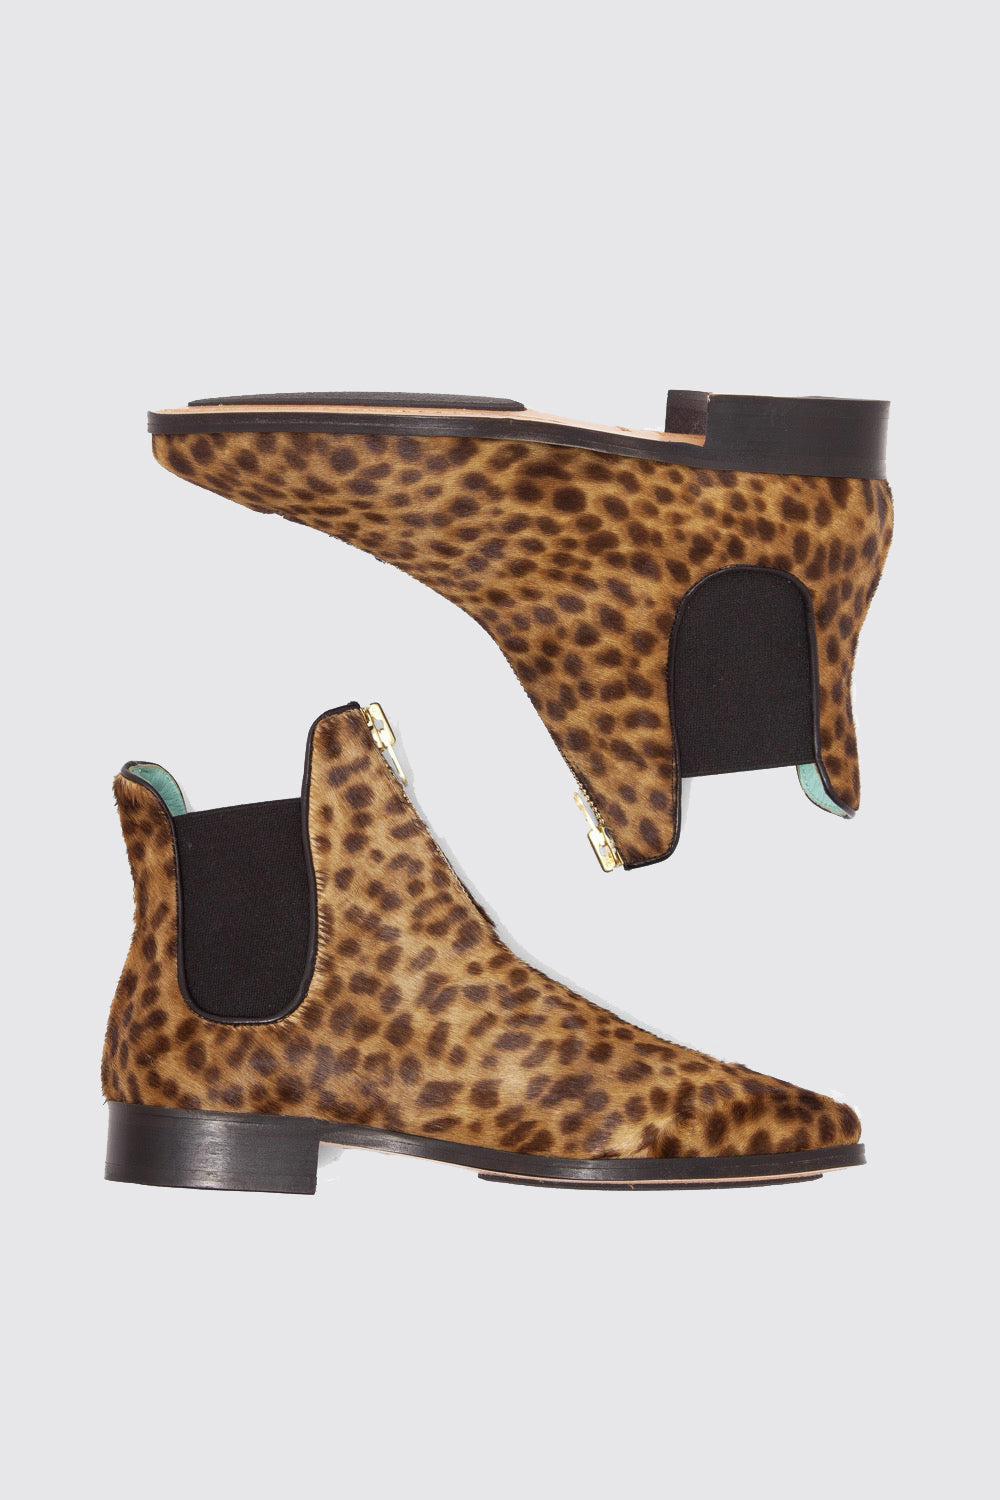 Duchesse boots in leopard printed leather